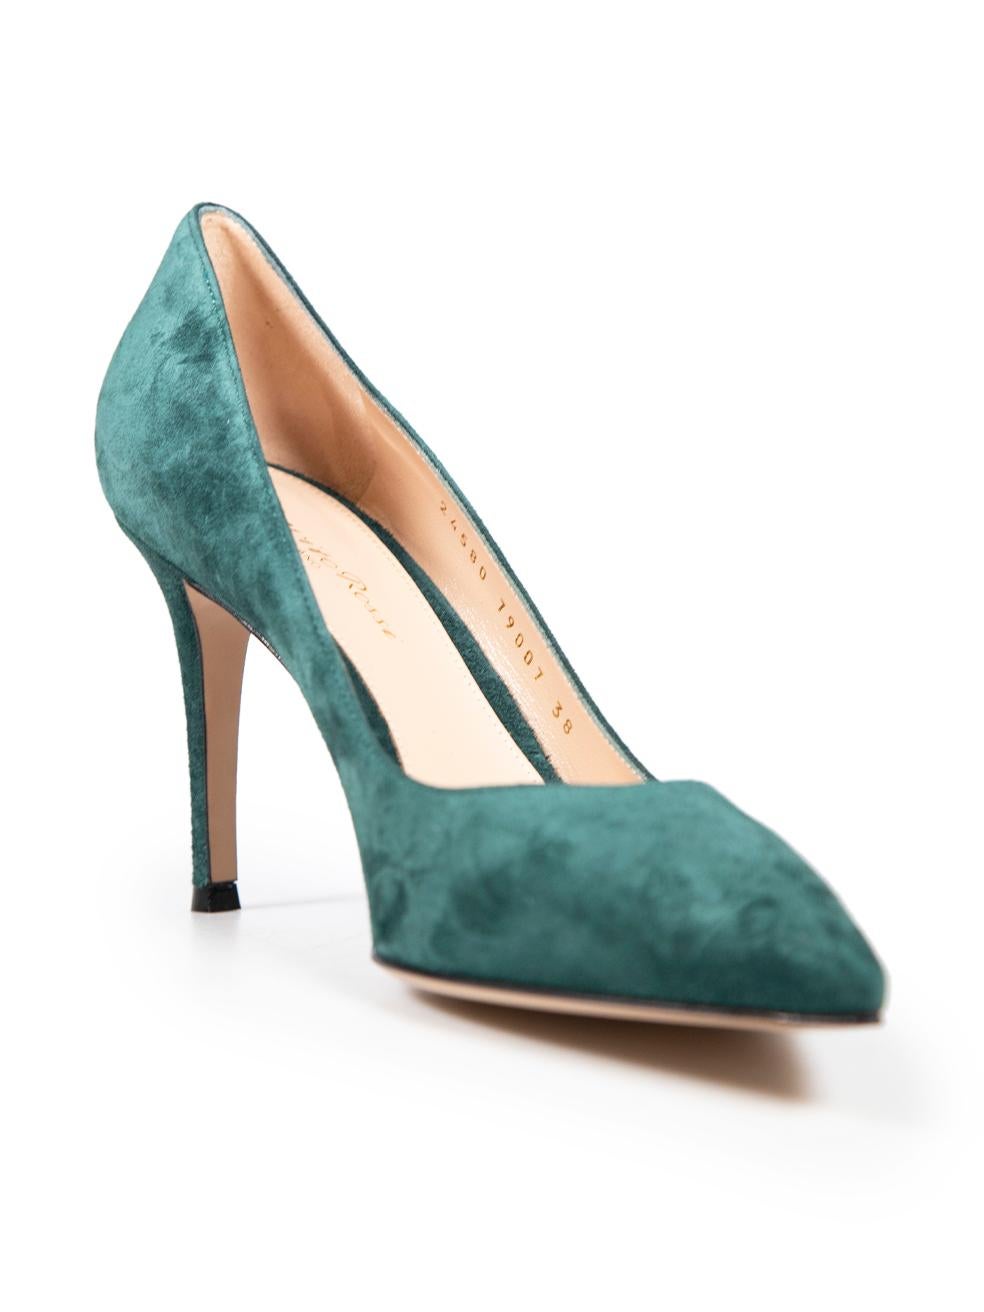 CONDITION is Never worn, with tags. No visible wear to shoes is evident on this new Gianvito Rossi designer resale item. These shoes come with original box and dust bags.
 
 
 
 Details
 
 
 Green
 
 Suede
 
 Pumps
 
 Point toe
 
 Mid heeled
 
 Slip